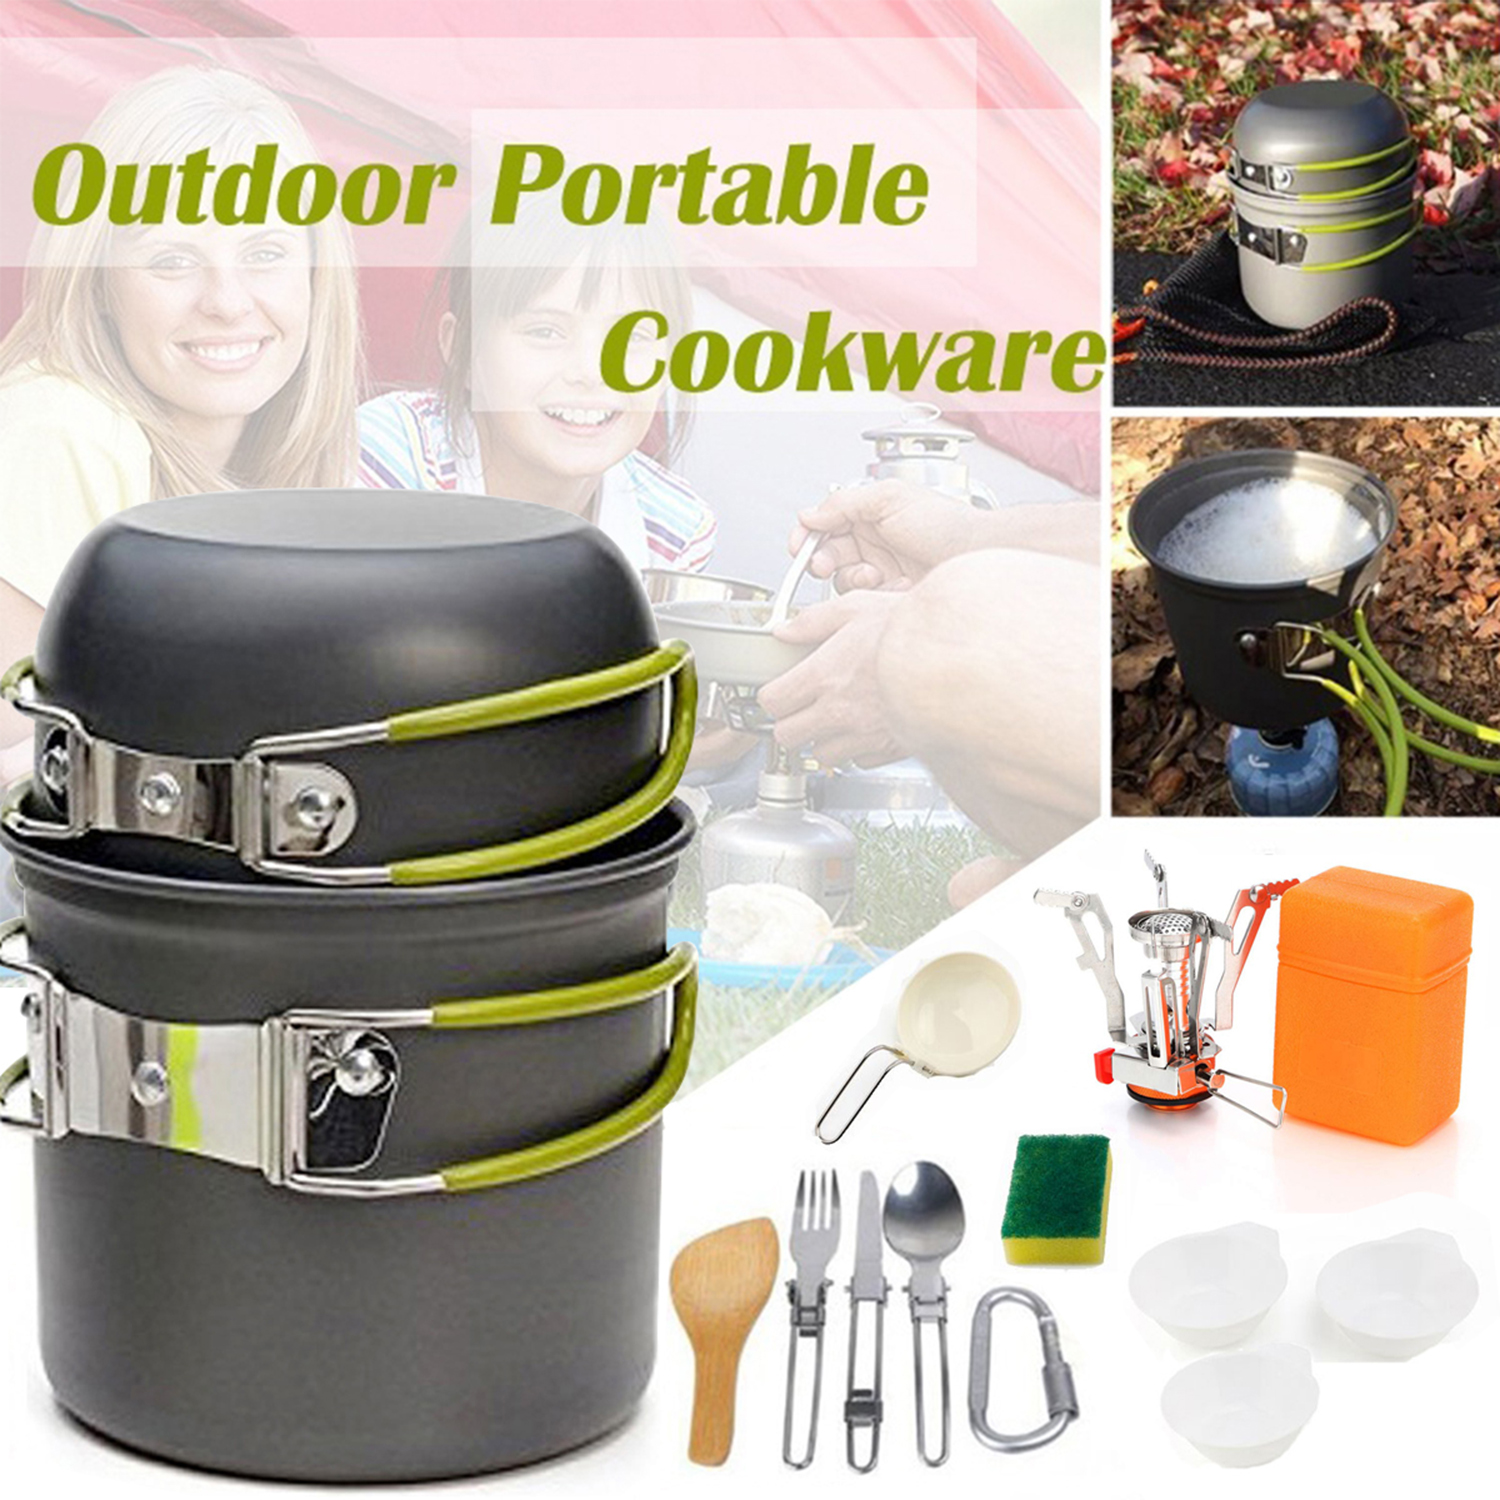 GL Portable Light Outdoor Camping Cookware Sets Gas Stove with Foldable Tableware Pan Dishwashing Sponge Hiking Picnic Tool 1